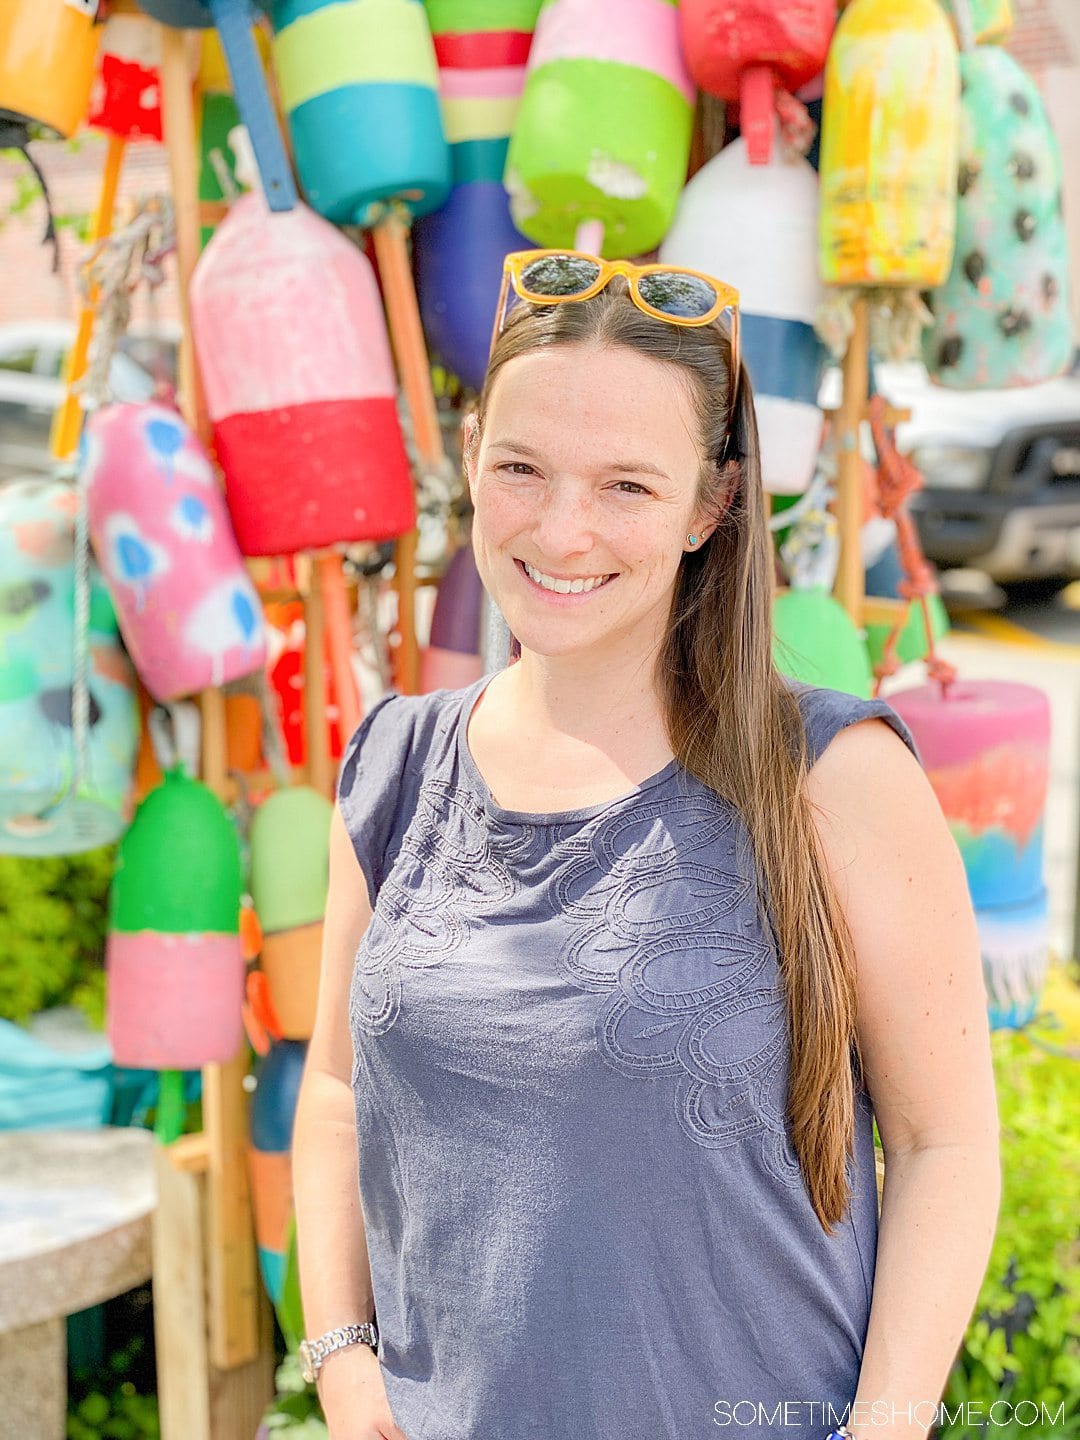 Woman in a grey shirt with yellow sunglasses on top of her head, with colorful lobster buoys behind her.